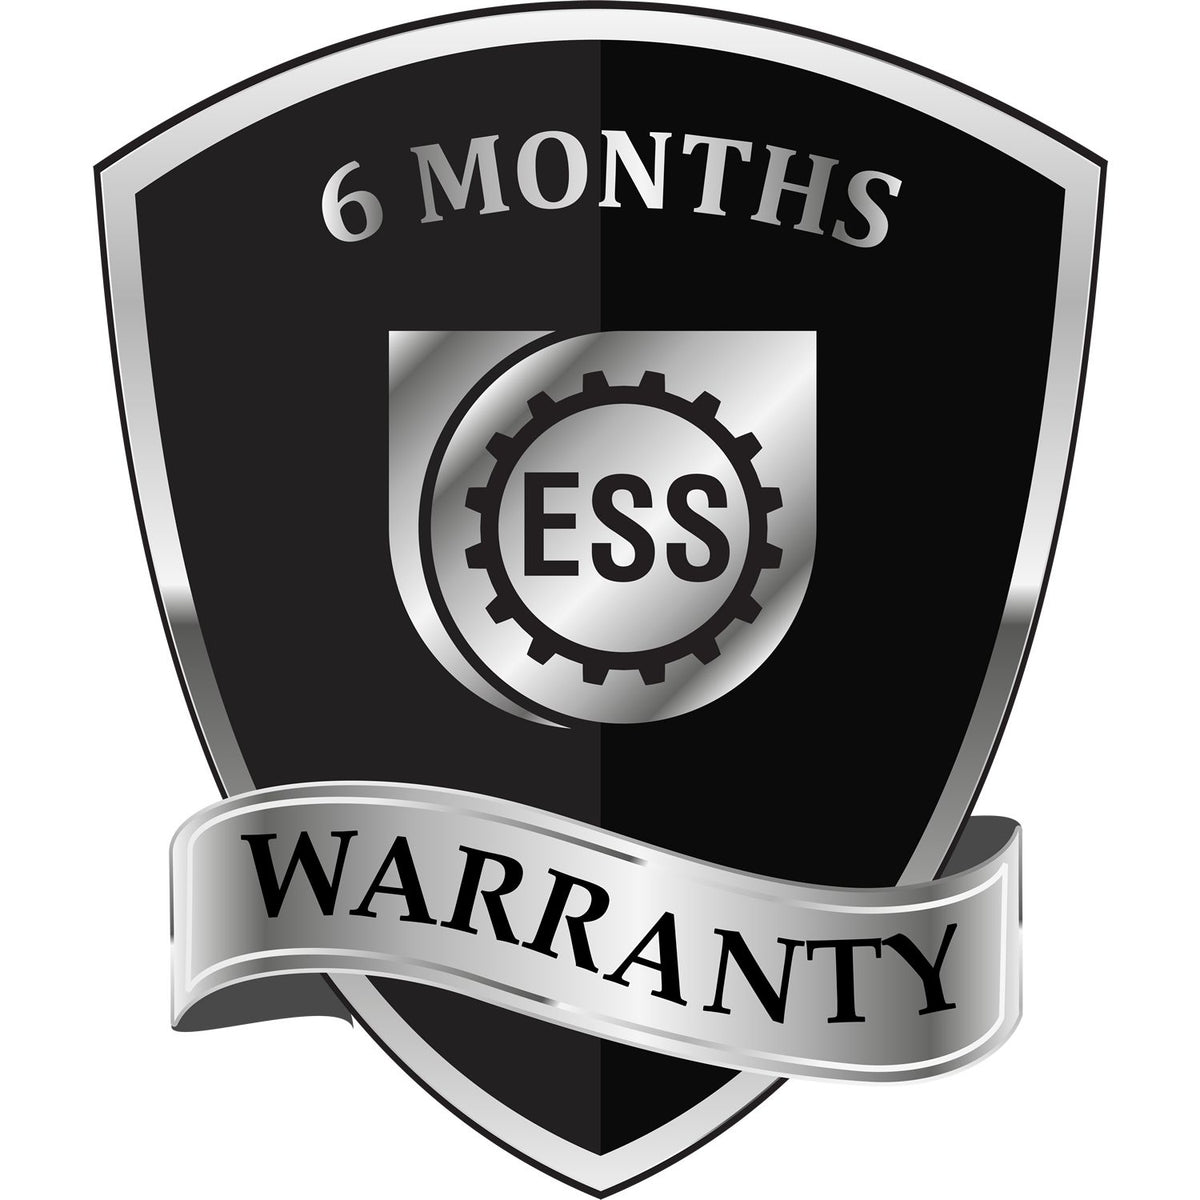 A badge or emblem showing a warranty icon for the Vermont Professional Engineer Seal Stamp